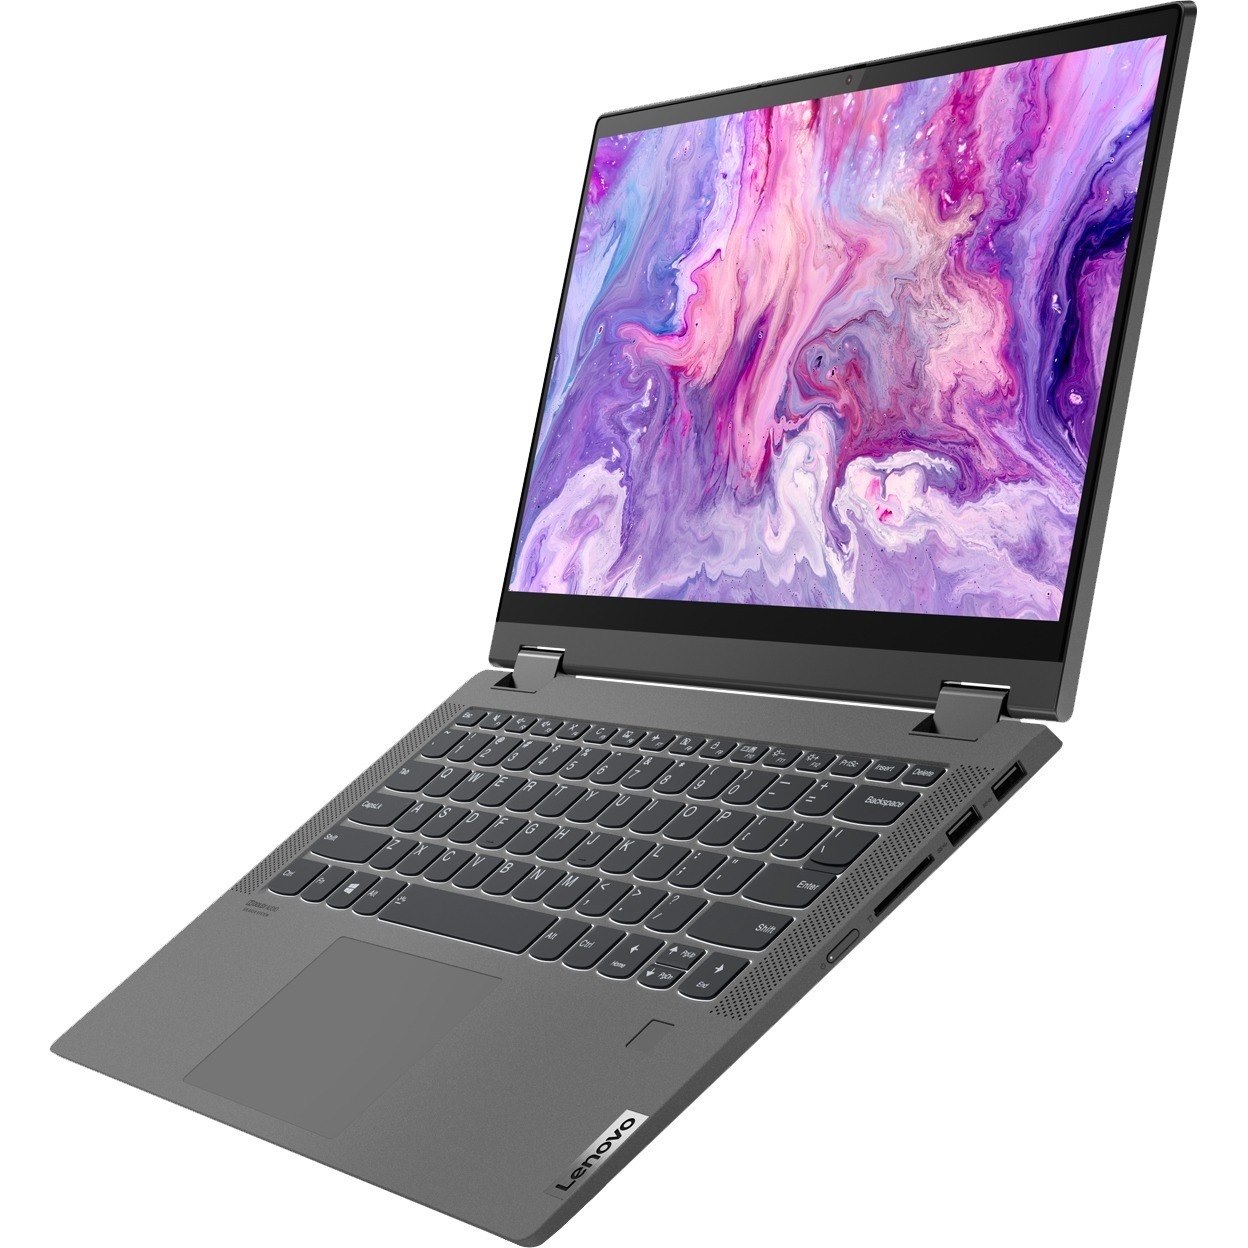 Lenovo IdeaPad Flex 5 14ITL05 82HS00QFCF 14" Touchscreen Convertible 2 in 1 Notebook - Full HD - Intel Core i7 11th Gen i7-1165G7 - 16 GB - 512 GB SSD - English (US), French Keyboard - Graphite Gray